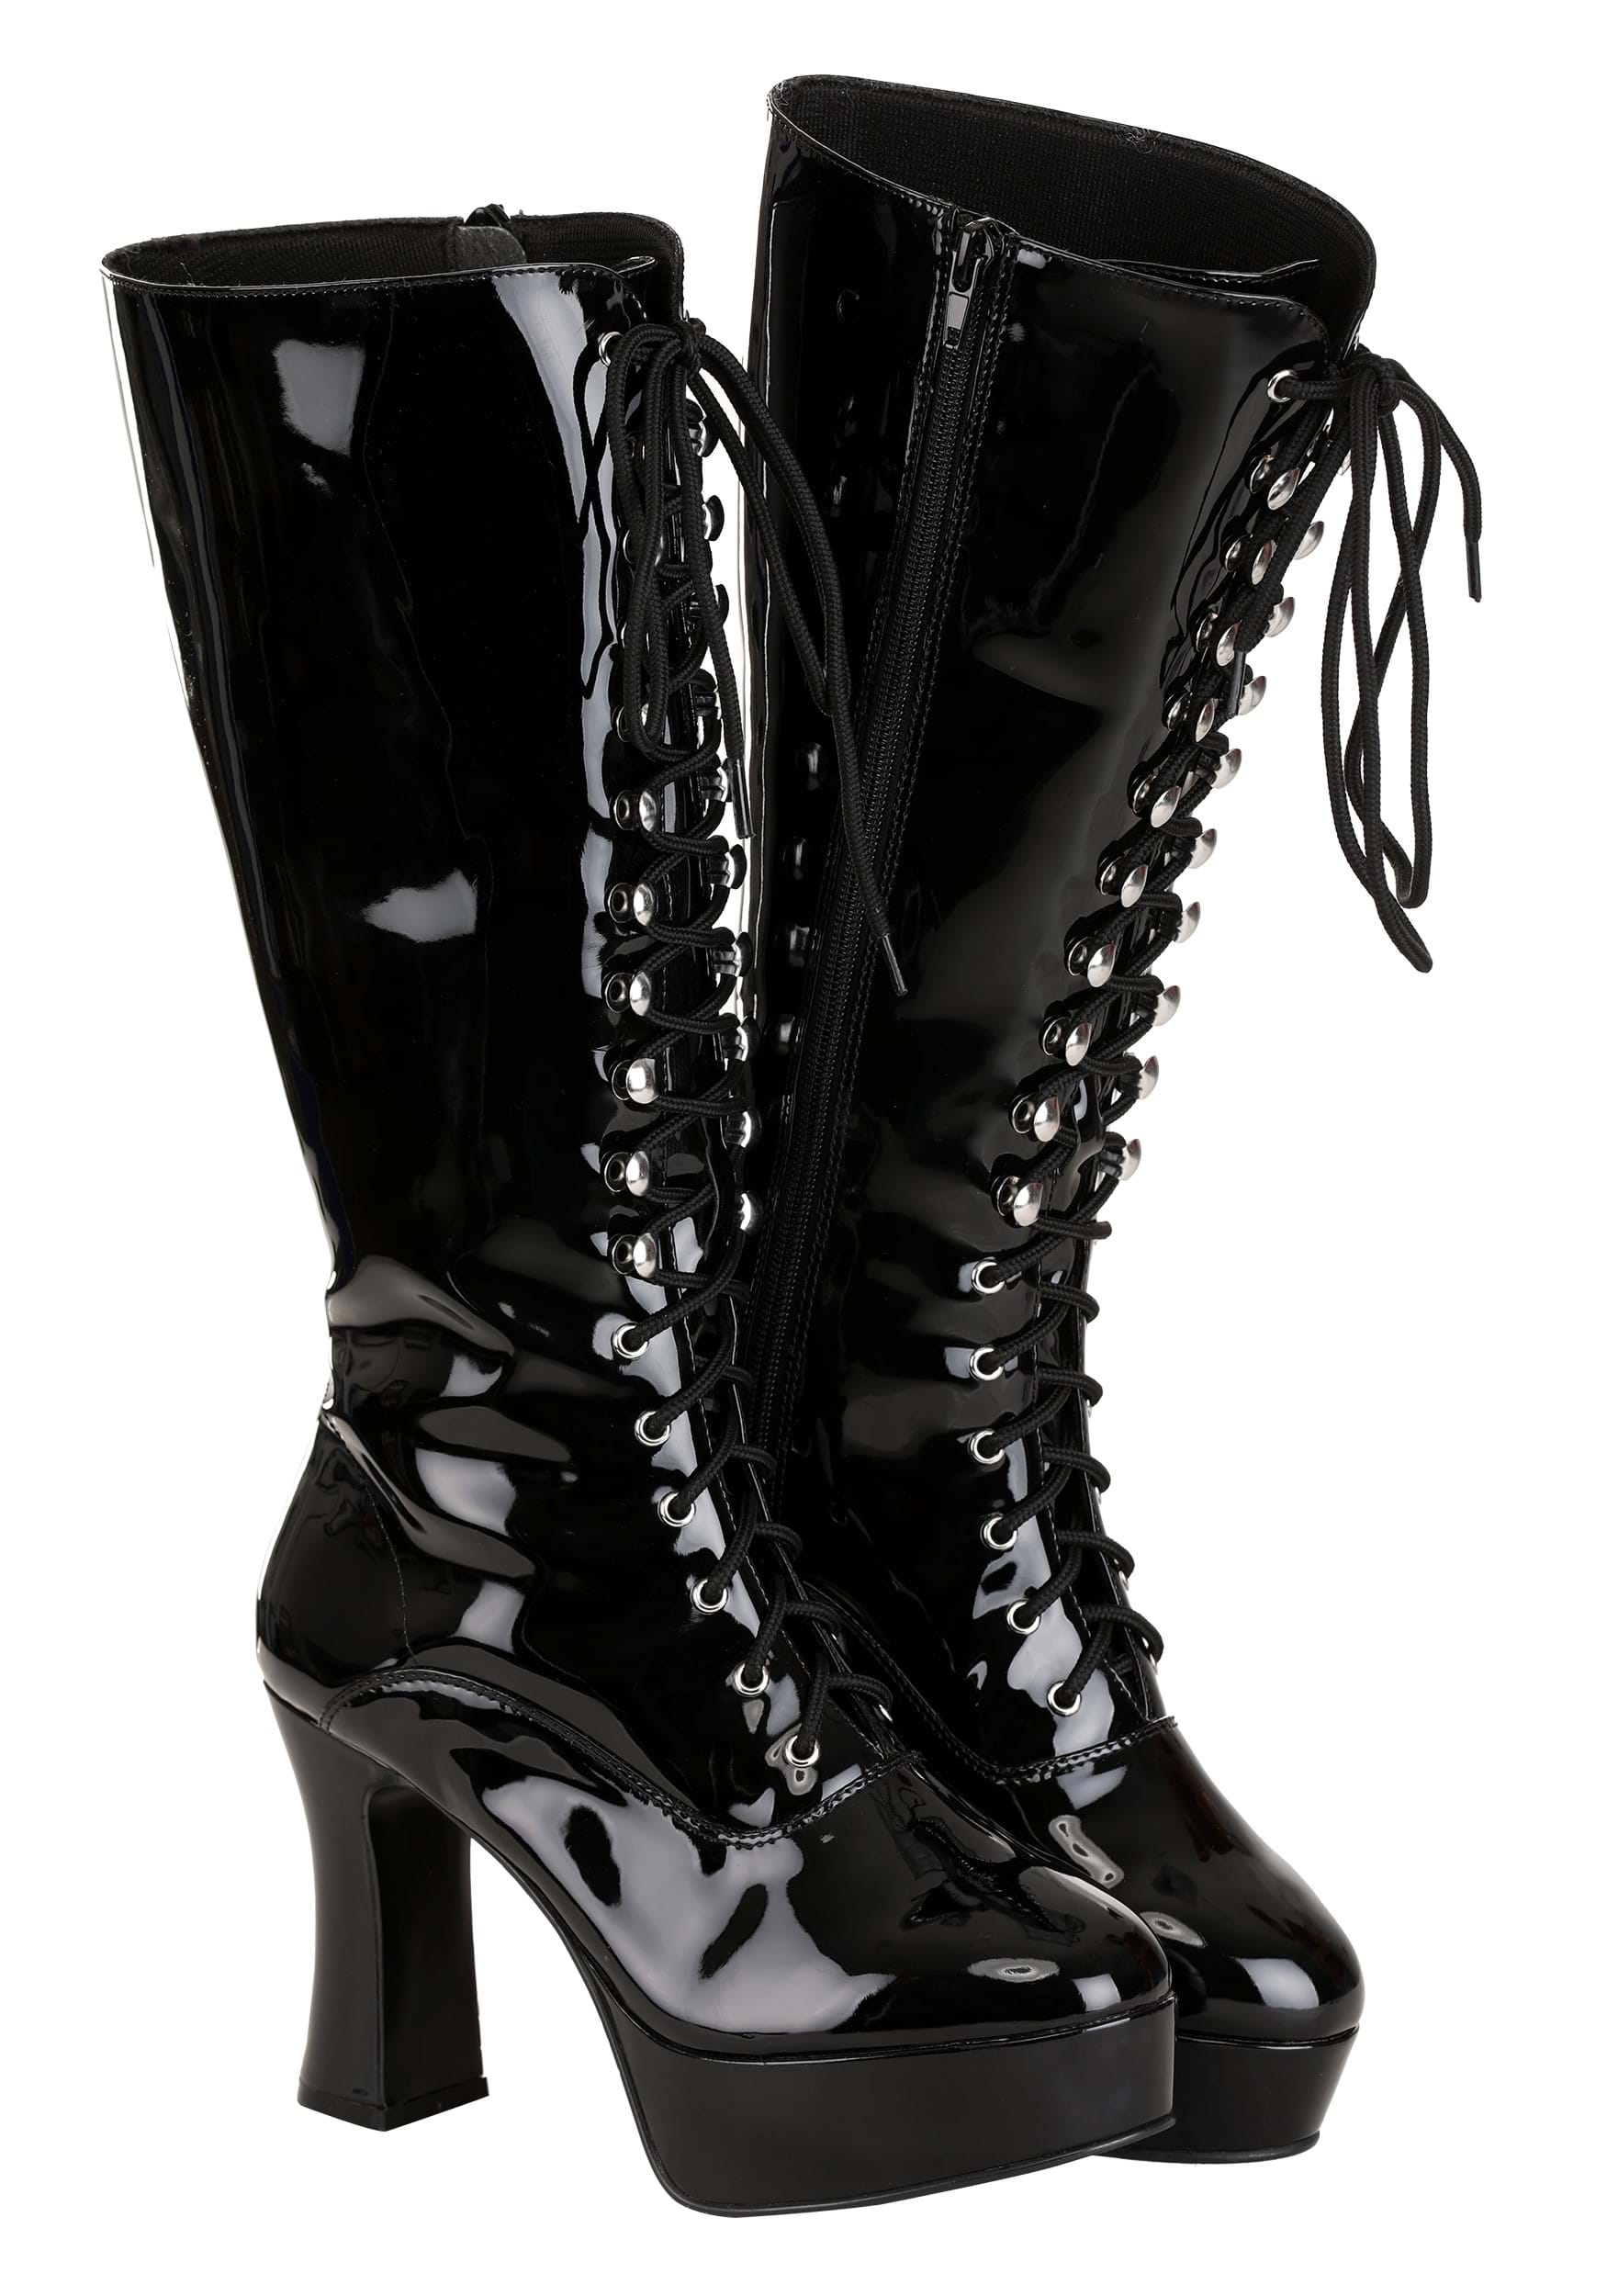 Image of Adult Sexy Black Faux Leather Knee High Boots ID FUN3412AD-10